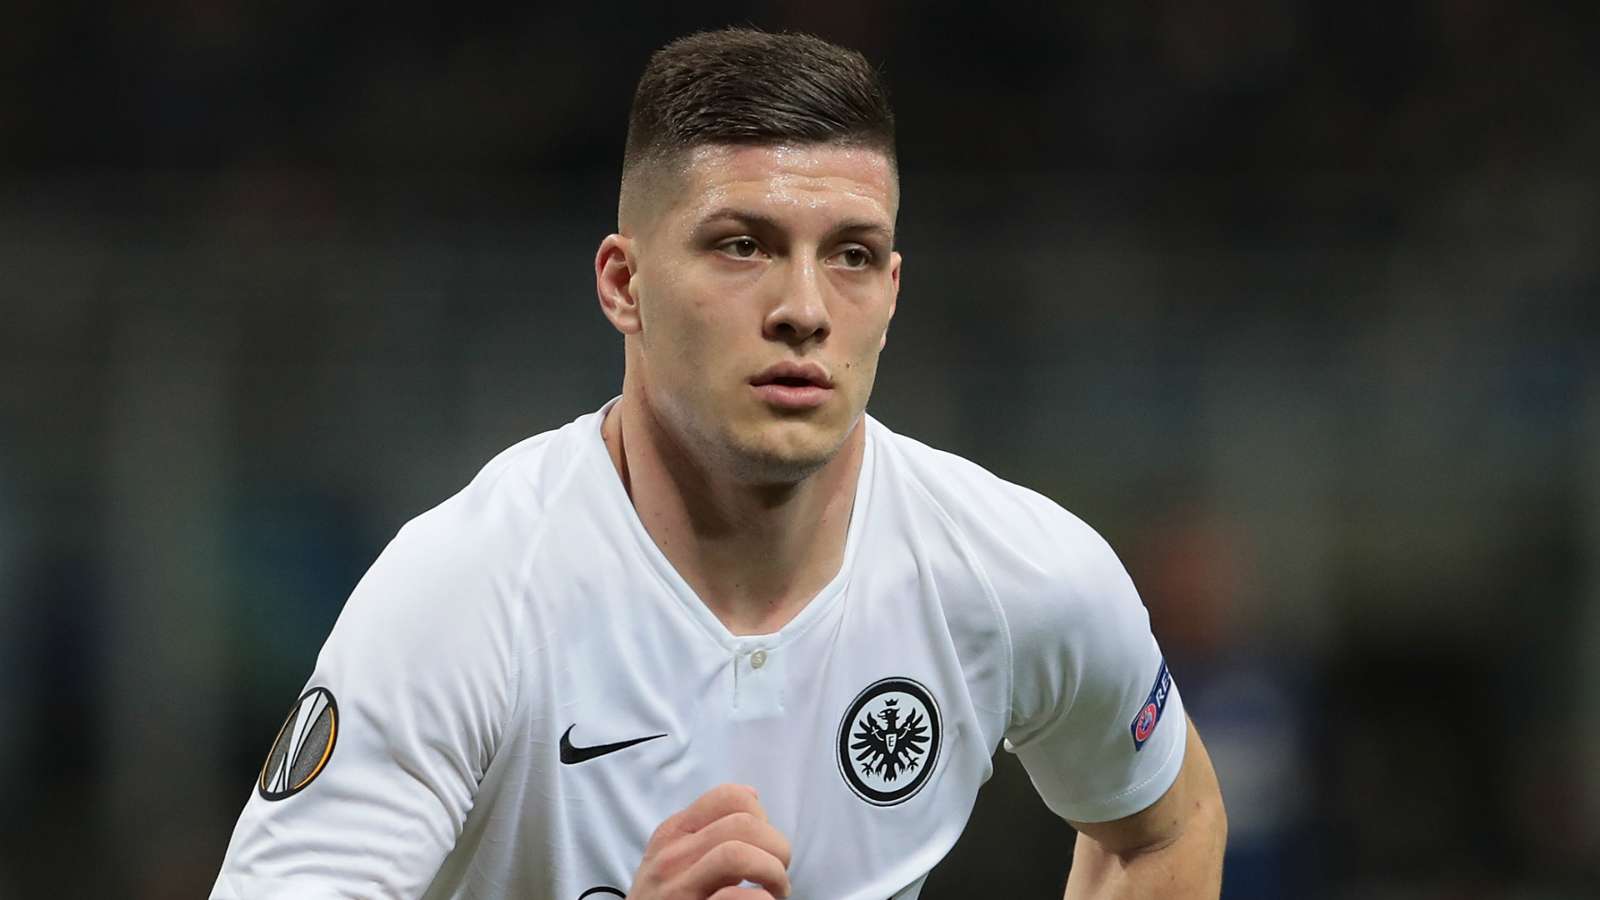 Jovic makes €70m Real Madrid move on six-year contract. | Transfer News